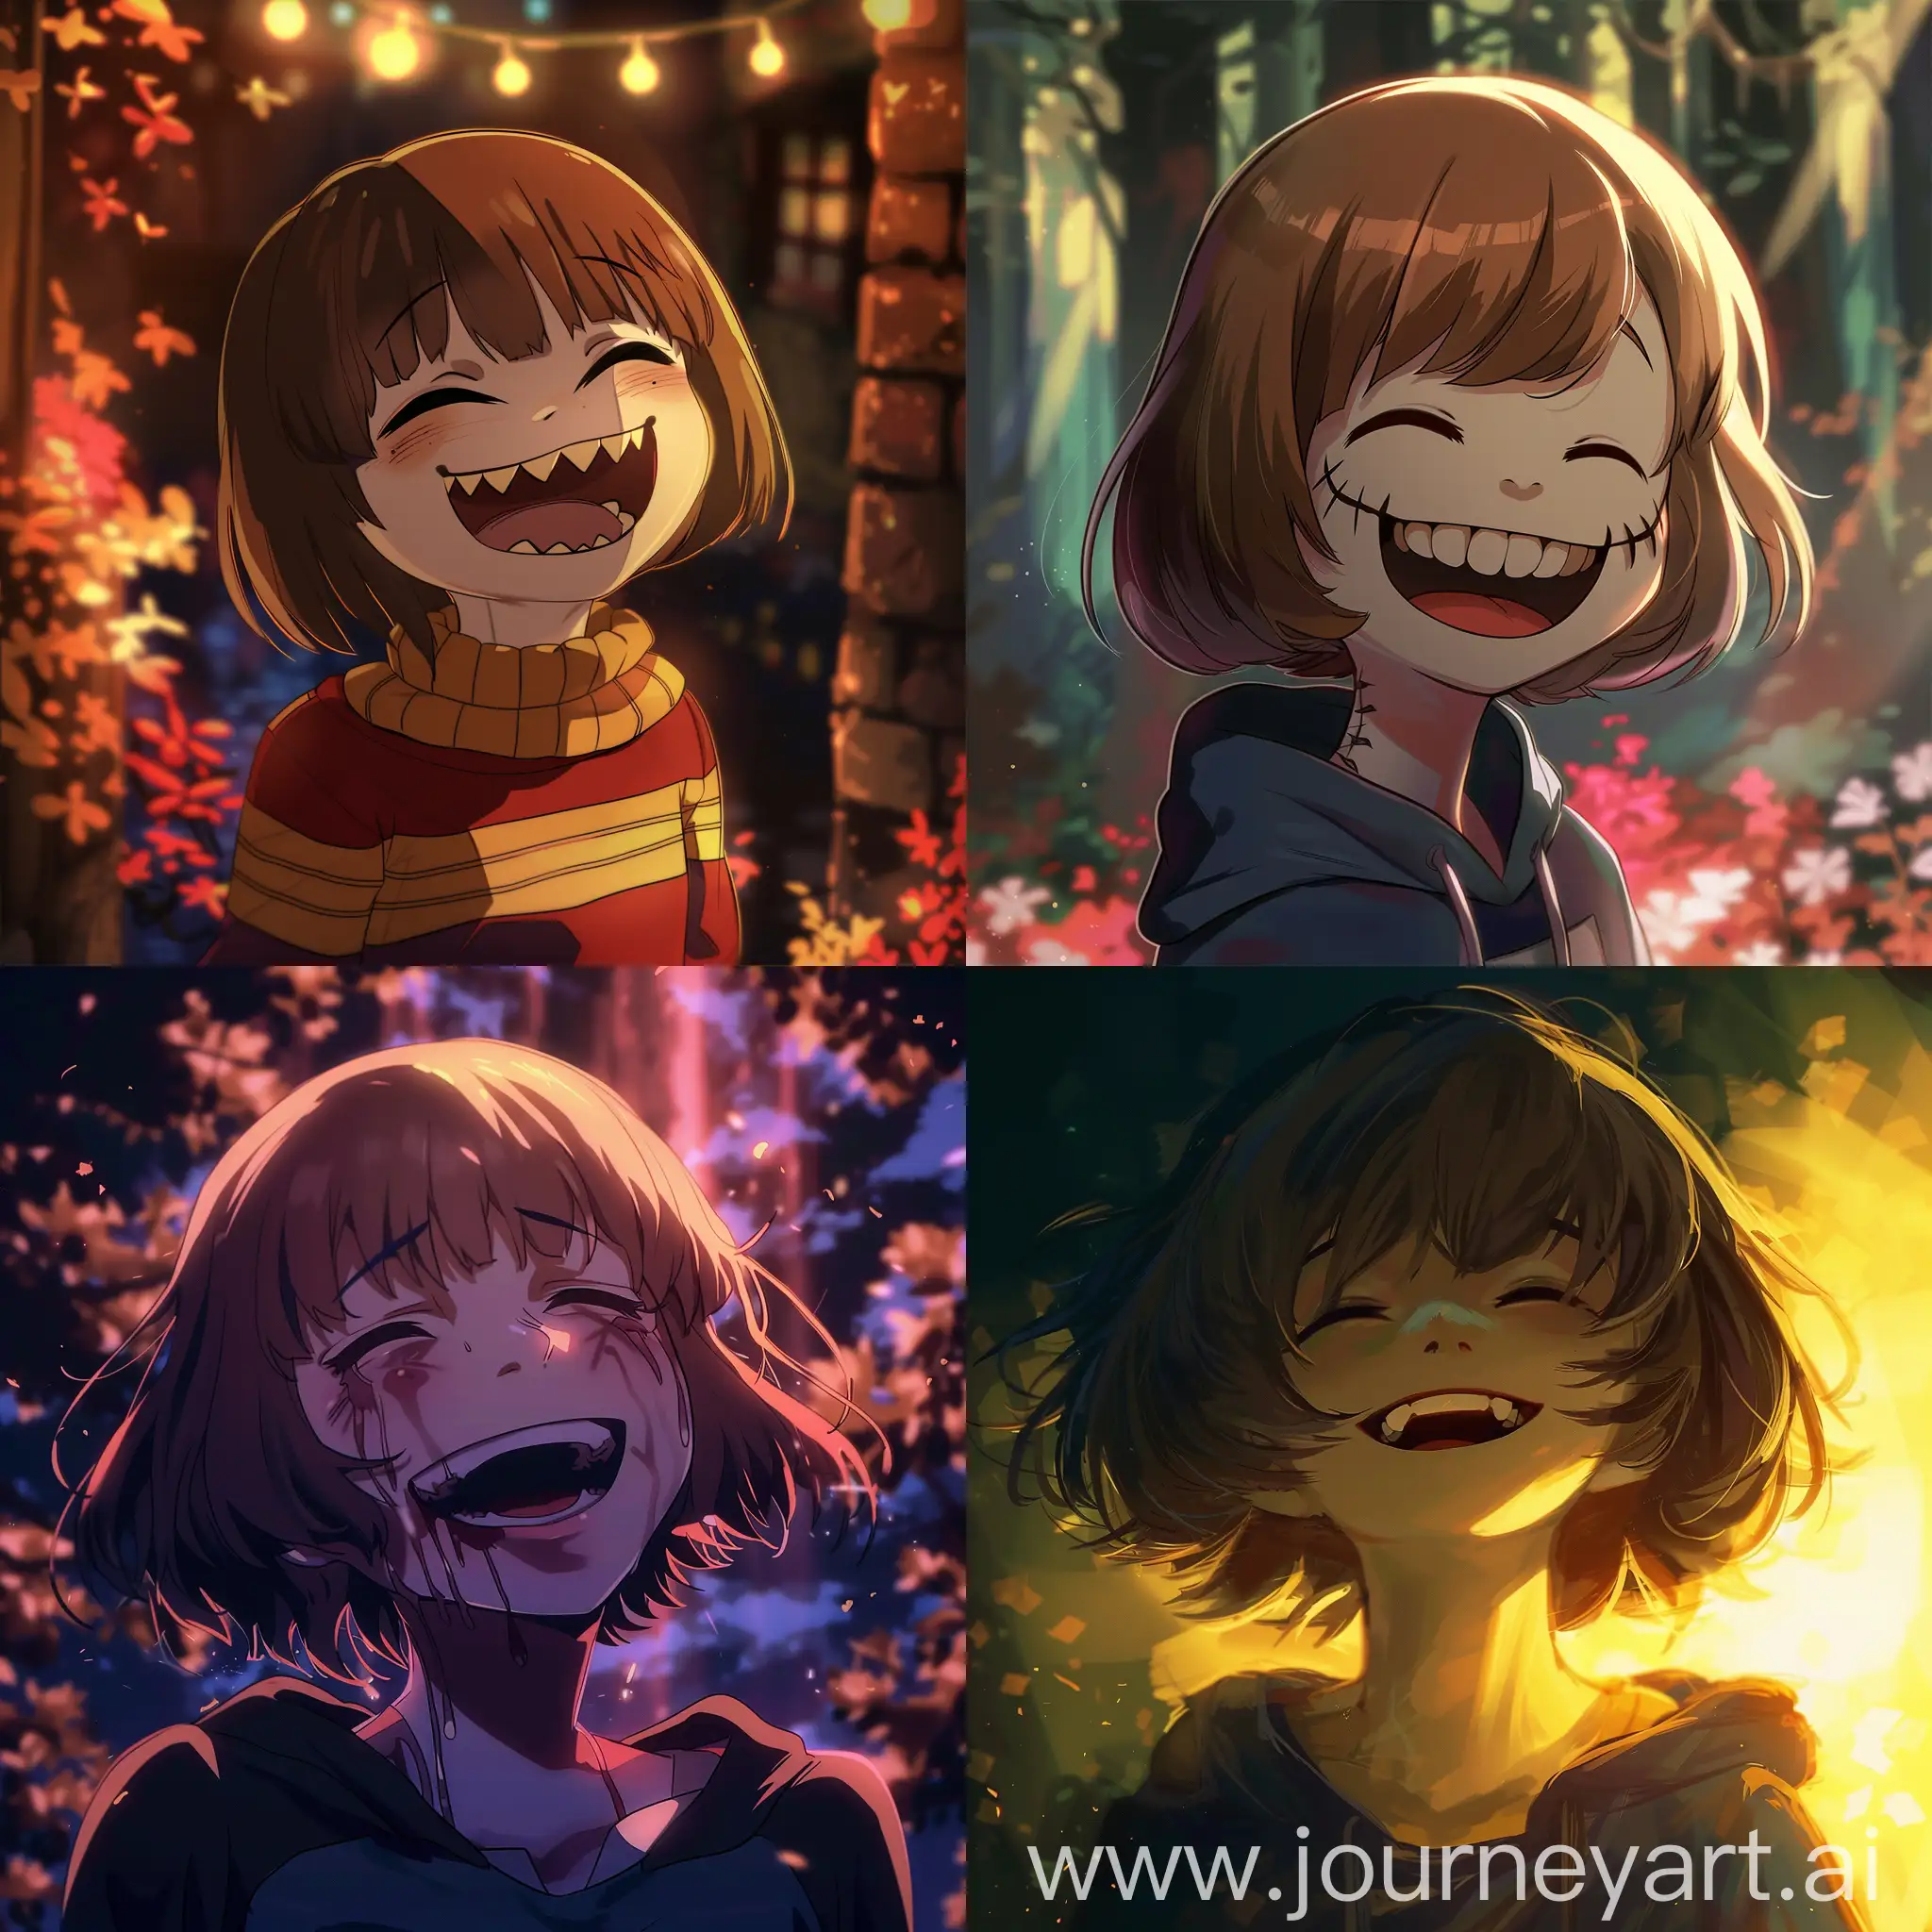 Frisk-Undertale-Anime-Smiling-and-Laughing-Artwork